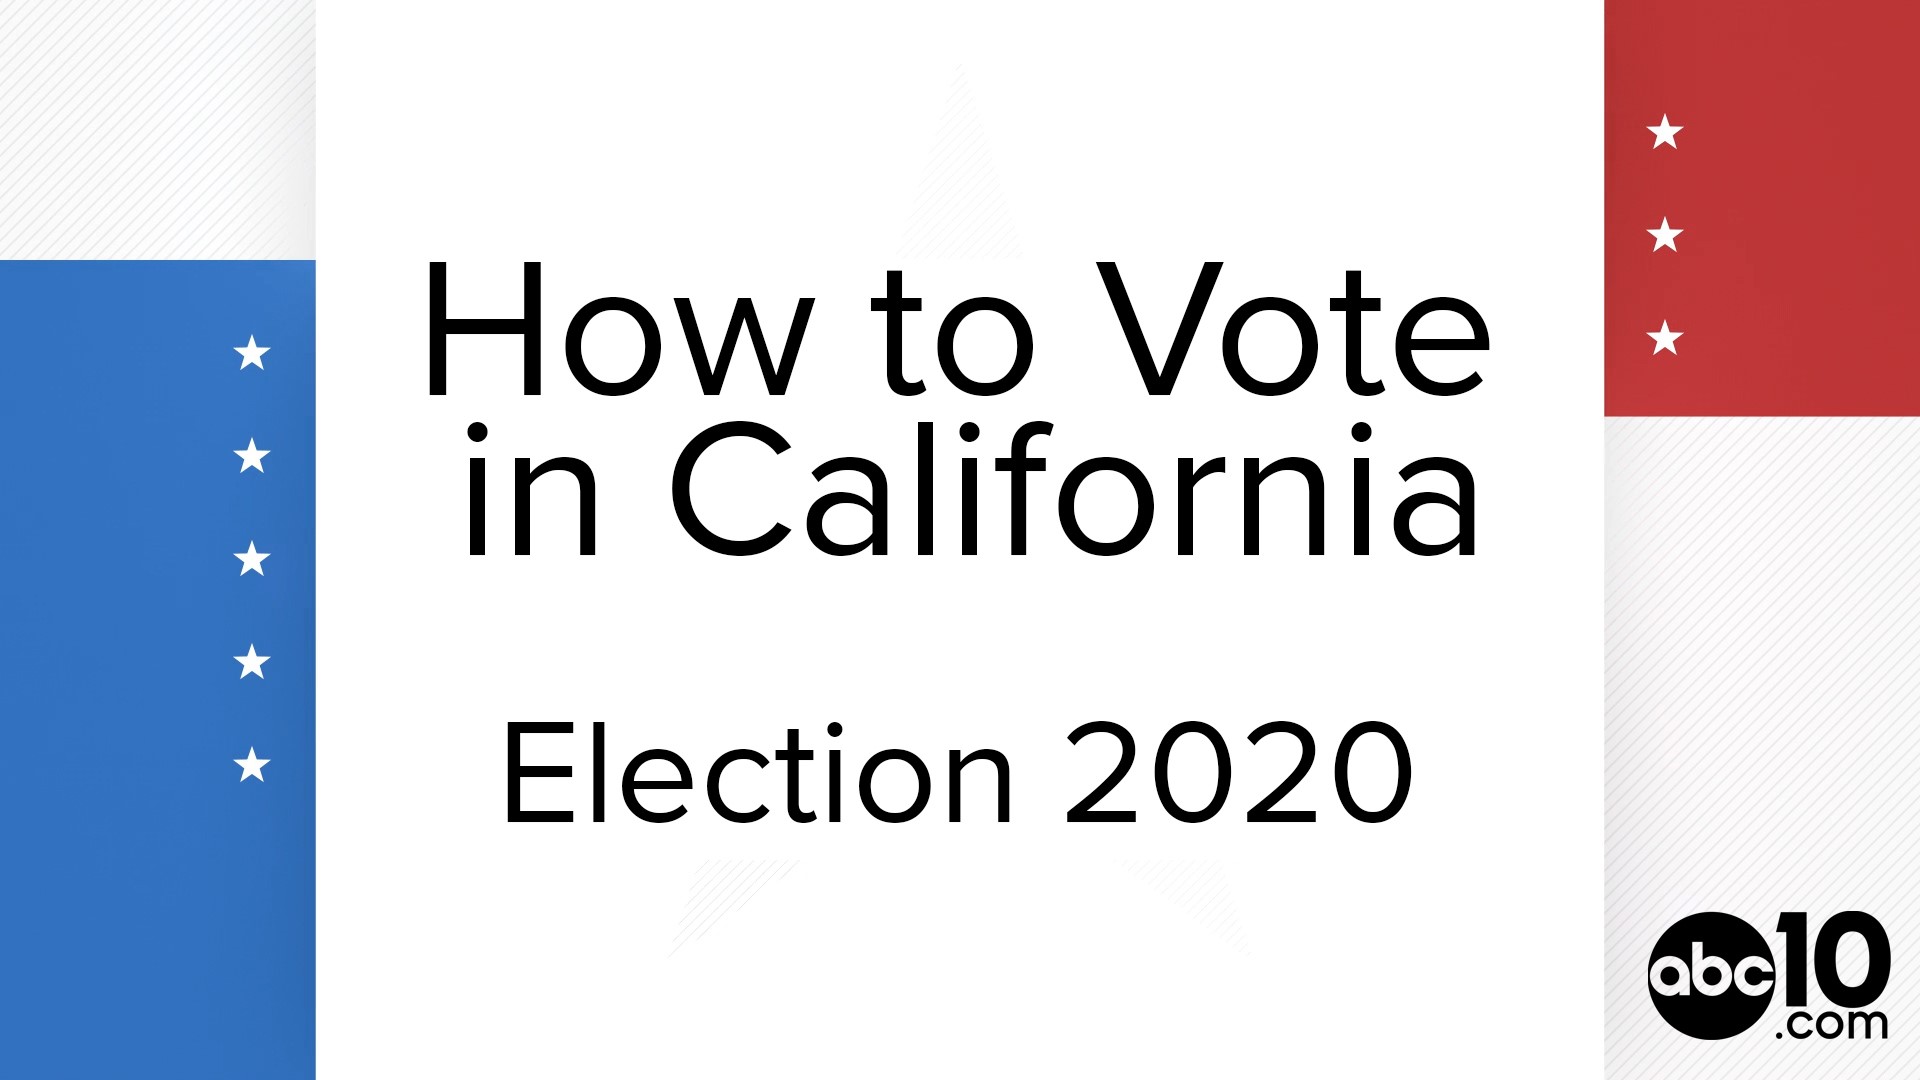 People in California have many options when it comes to voting in the November 2020 Presidential election. Here's a look at how to vote in California this year.